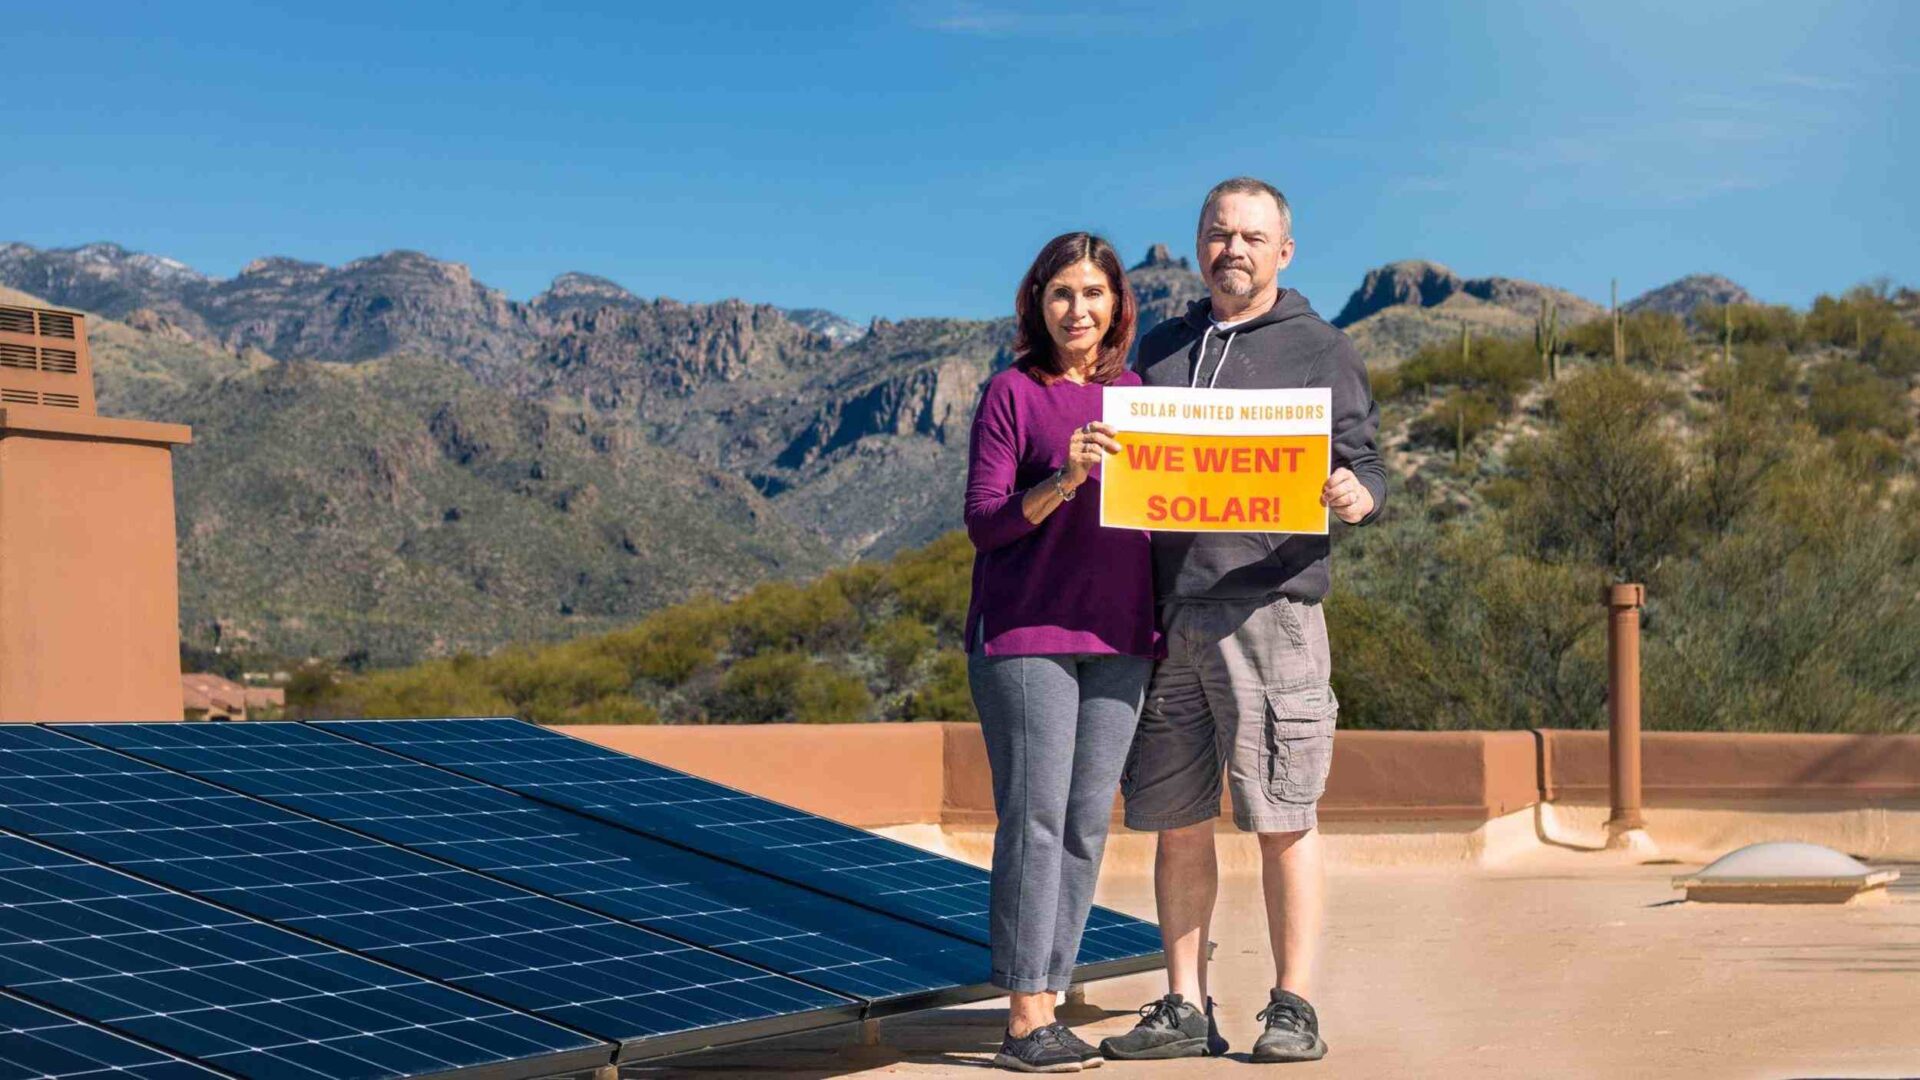 Couple standing on roof with solar panels installed, mountains behind them.